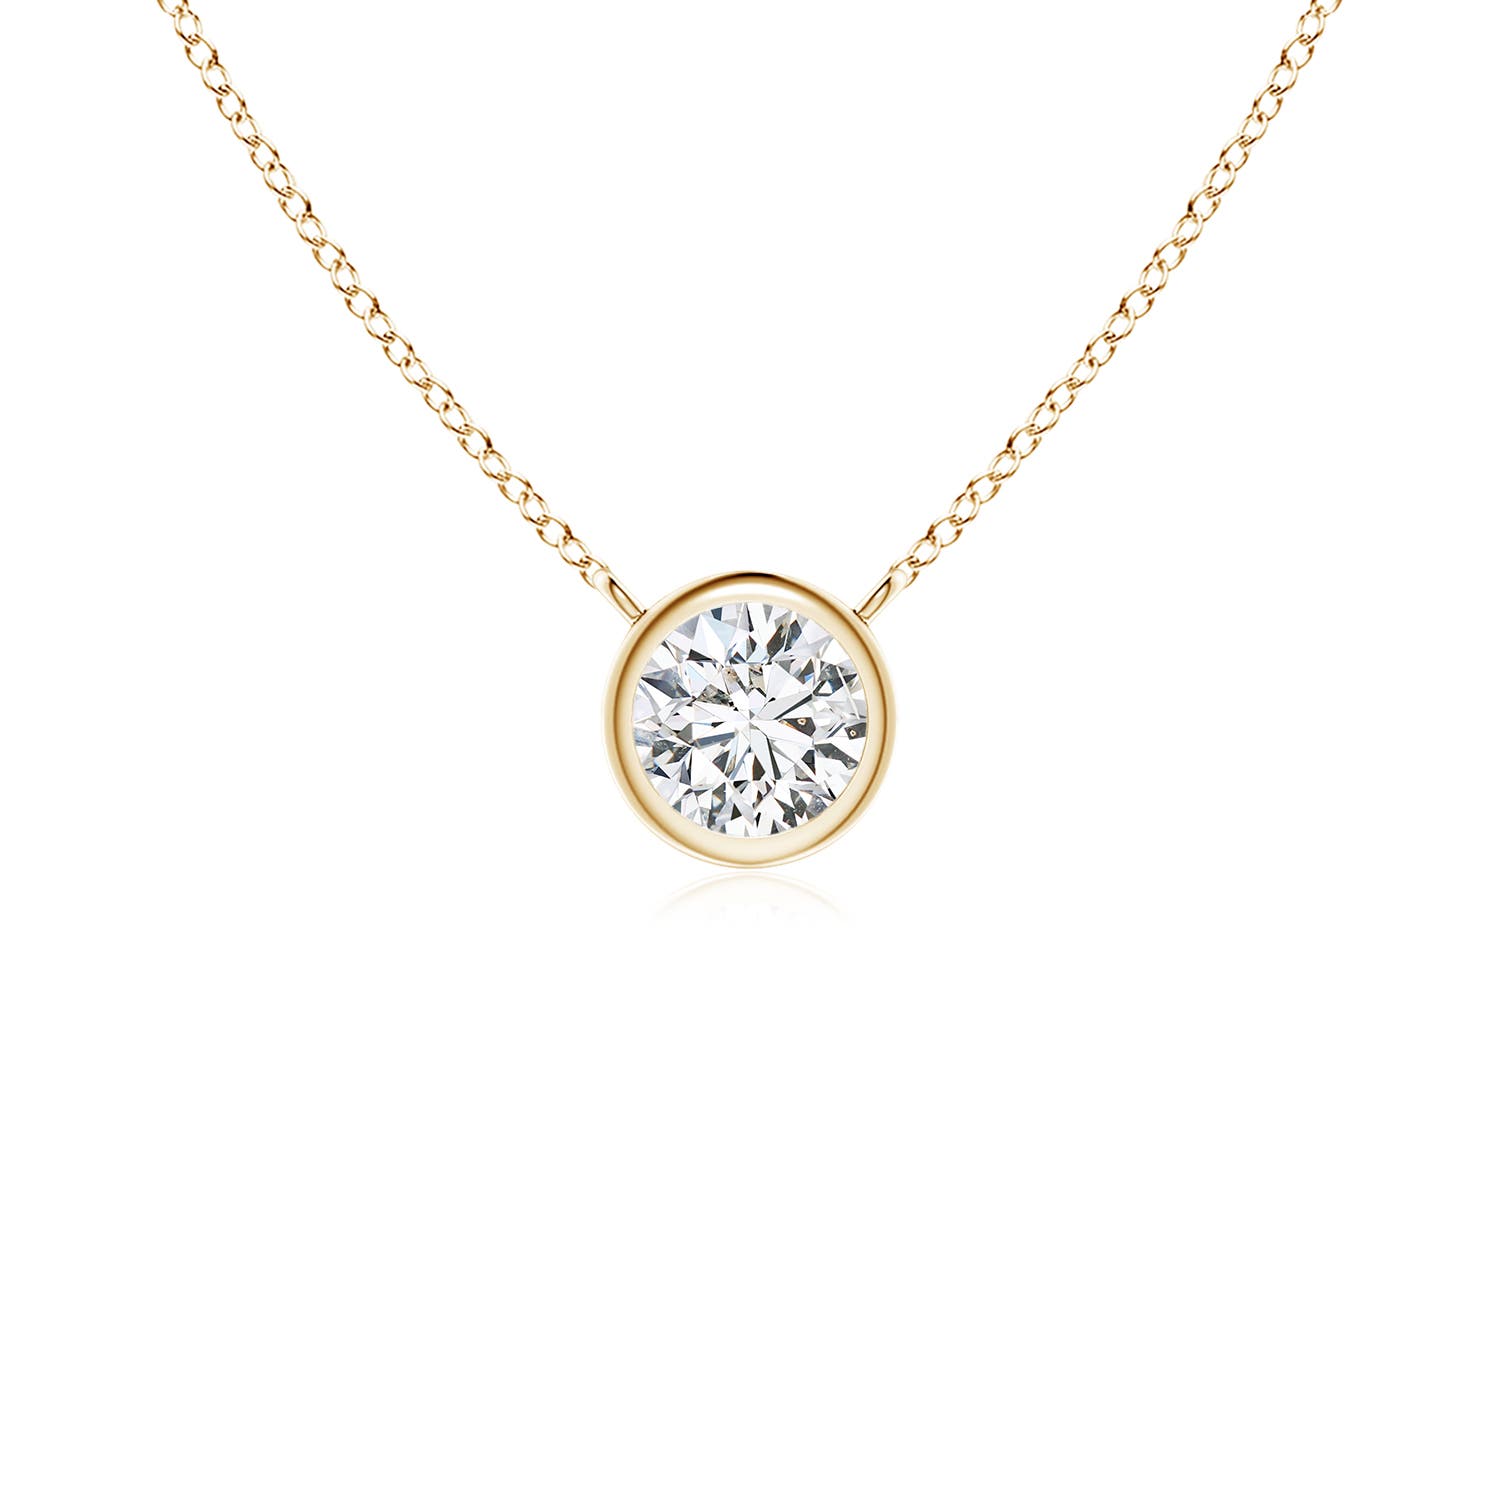 HSI2 / 0.11 CT / 14 KT Yellow Gold